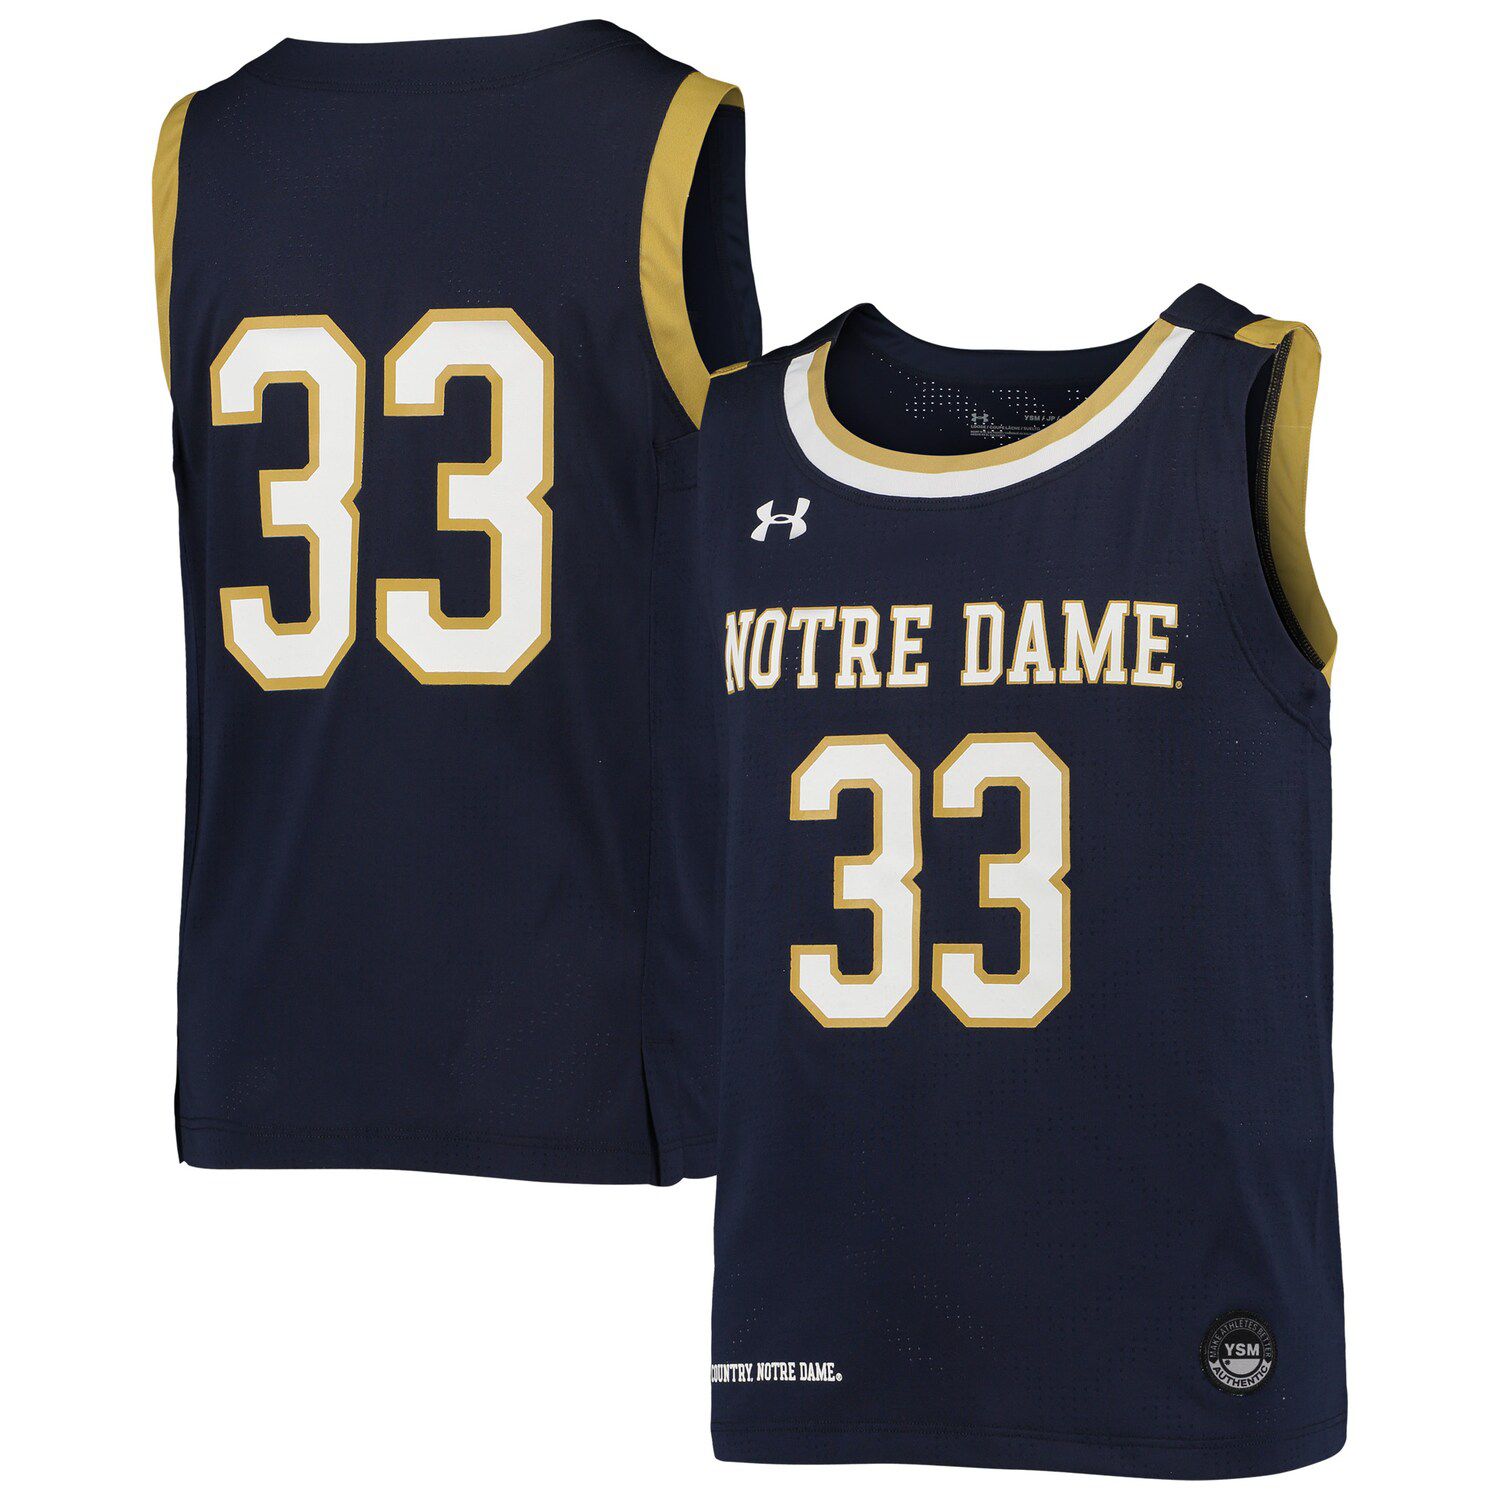 notre dame youth basketball jersey